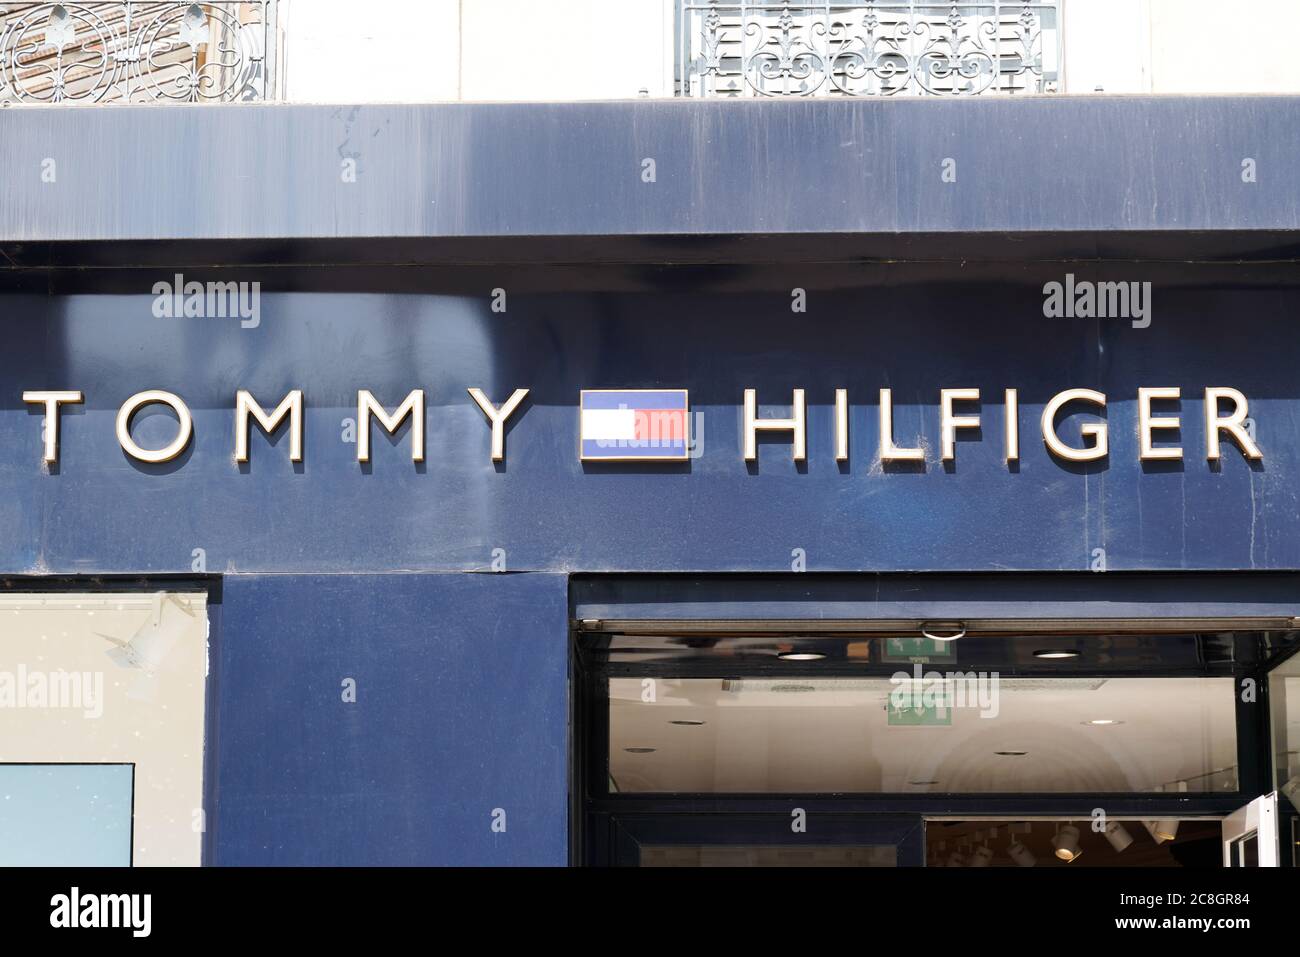 Tommy Hilfiger Clothing High Resolution Stock Photography and Images - Alamy